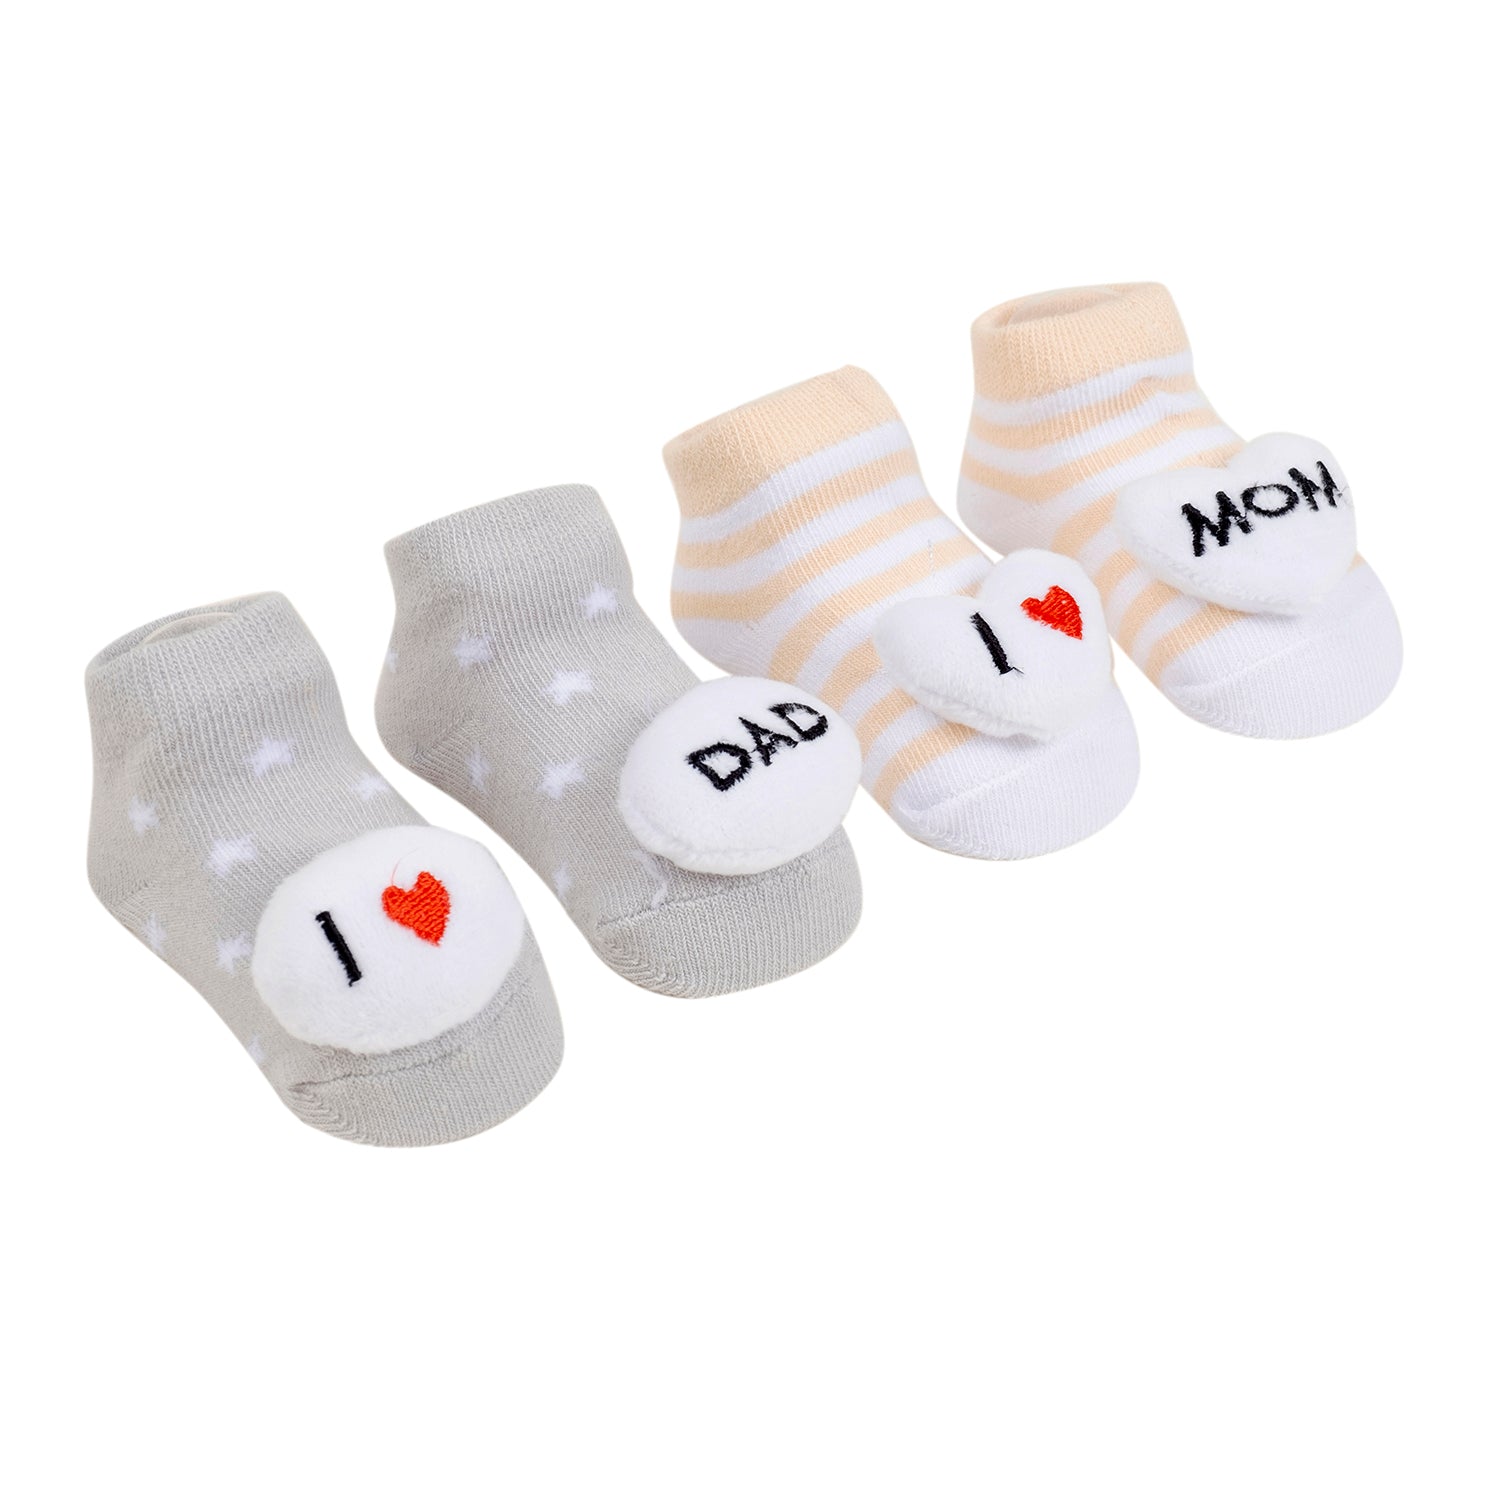 Baby Moo 3D I Love Mommy Daddy Cotton Ankle Length Fancy Infant Gift Set of 2 Socks Booties - Yellow, Grey